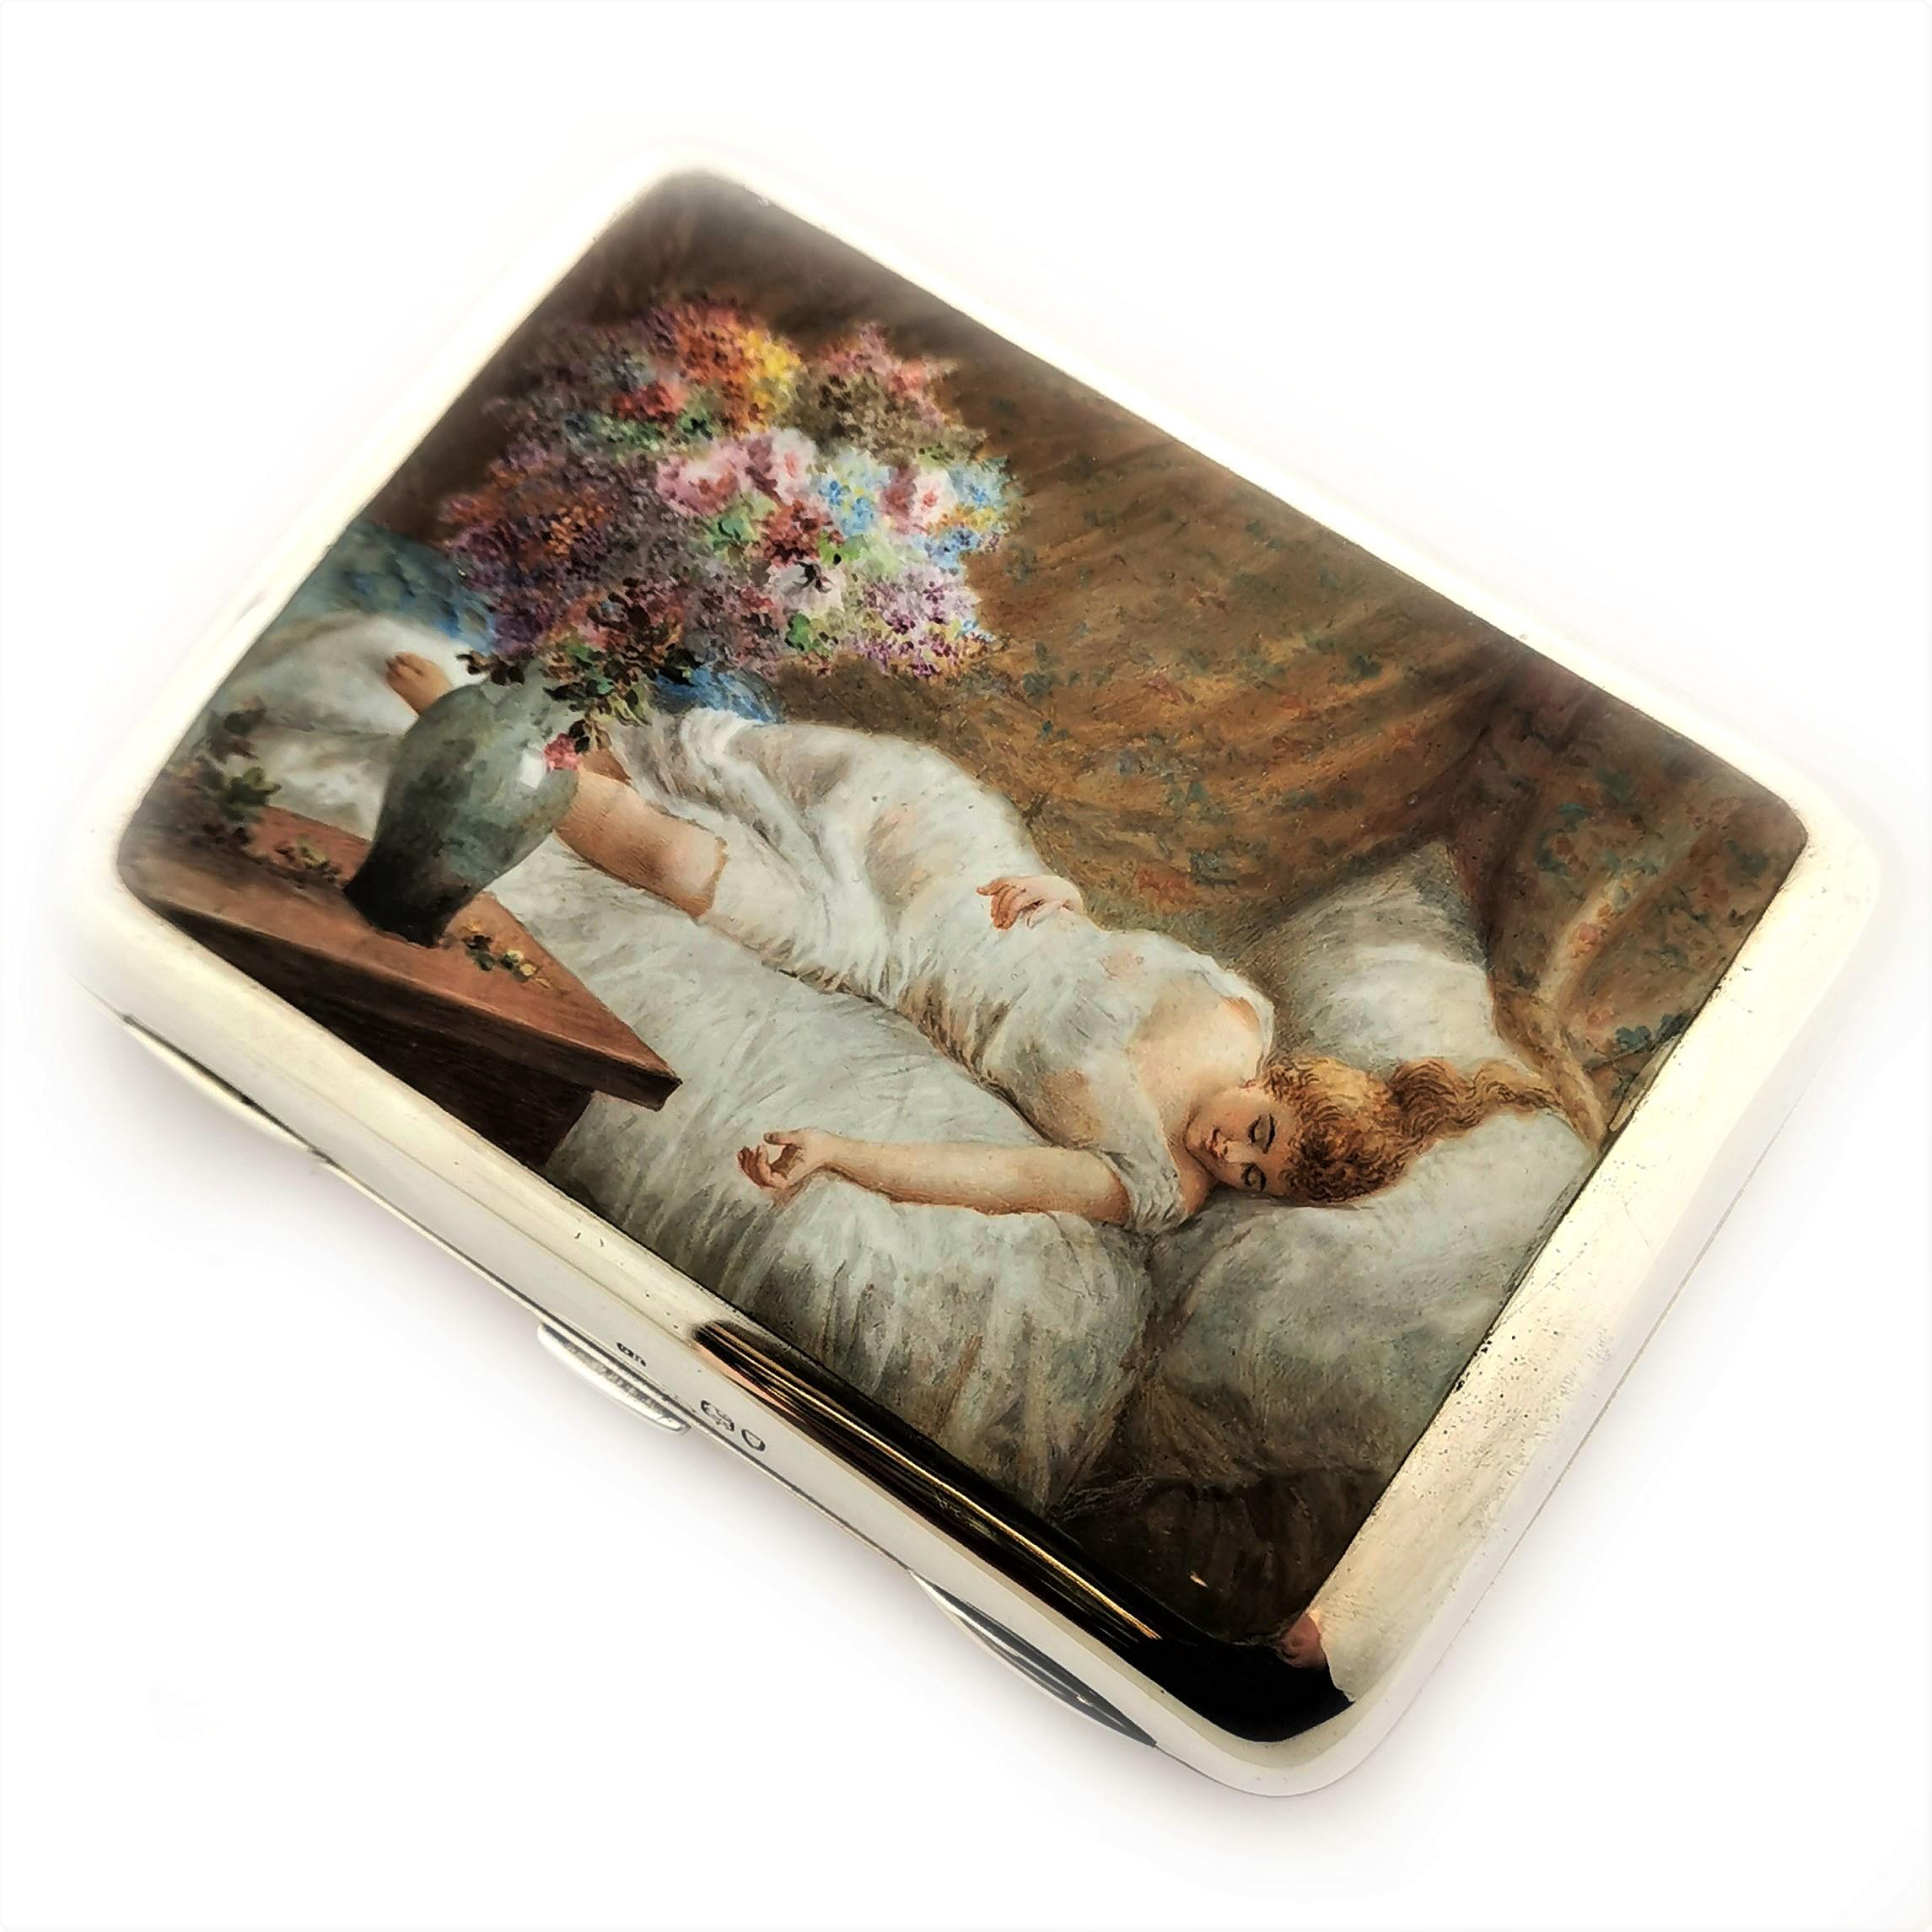 An antique solid Silver Cigar Case with a gorgeous enamel image on the front cover. This image shows a woman in a sheer nightdress reclining on a bed. There are flowers in the fore ground and ornate fabric in the background. This image is rendered